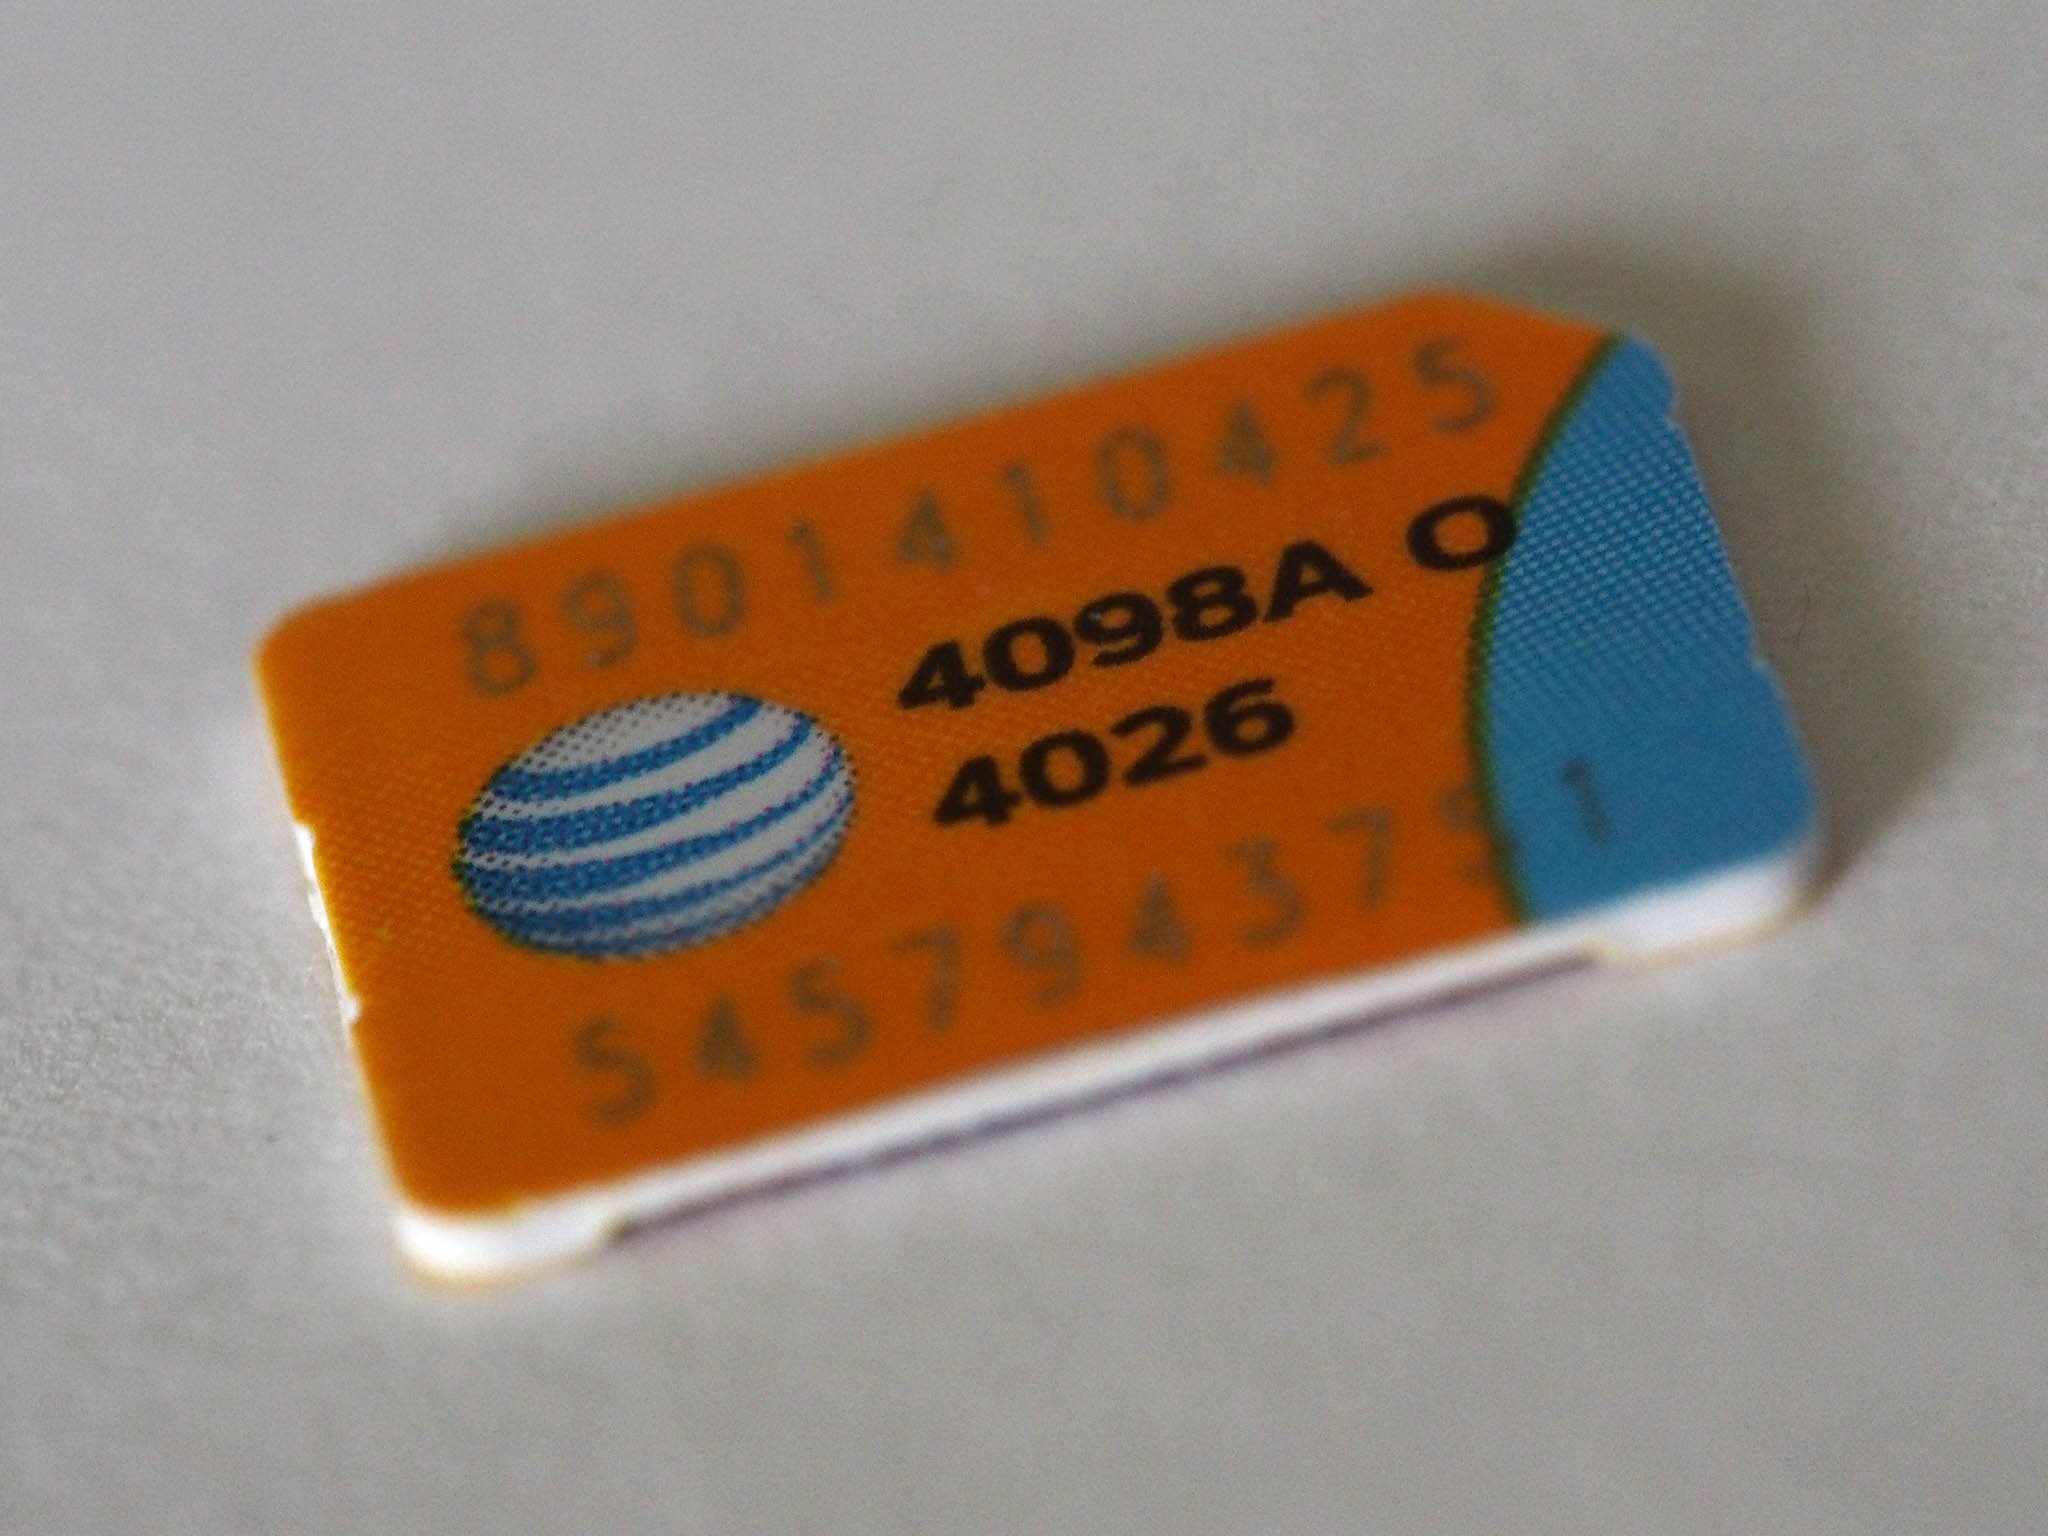 Strong subscriber growth powers AT&T's FQ2 2014 earnings